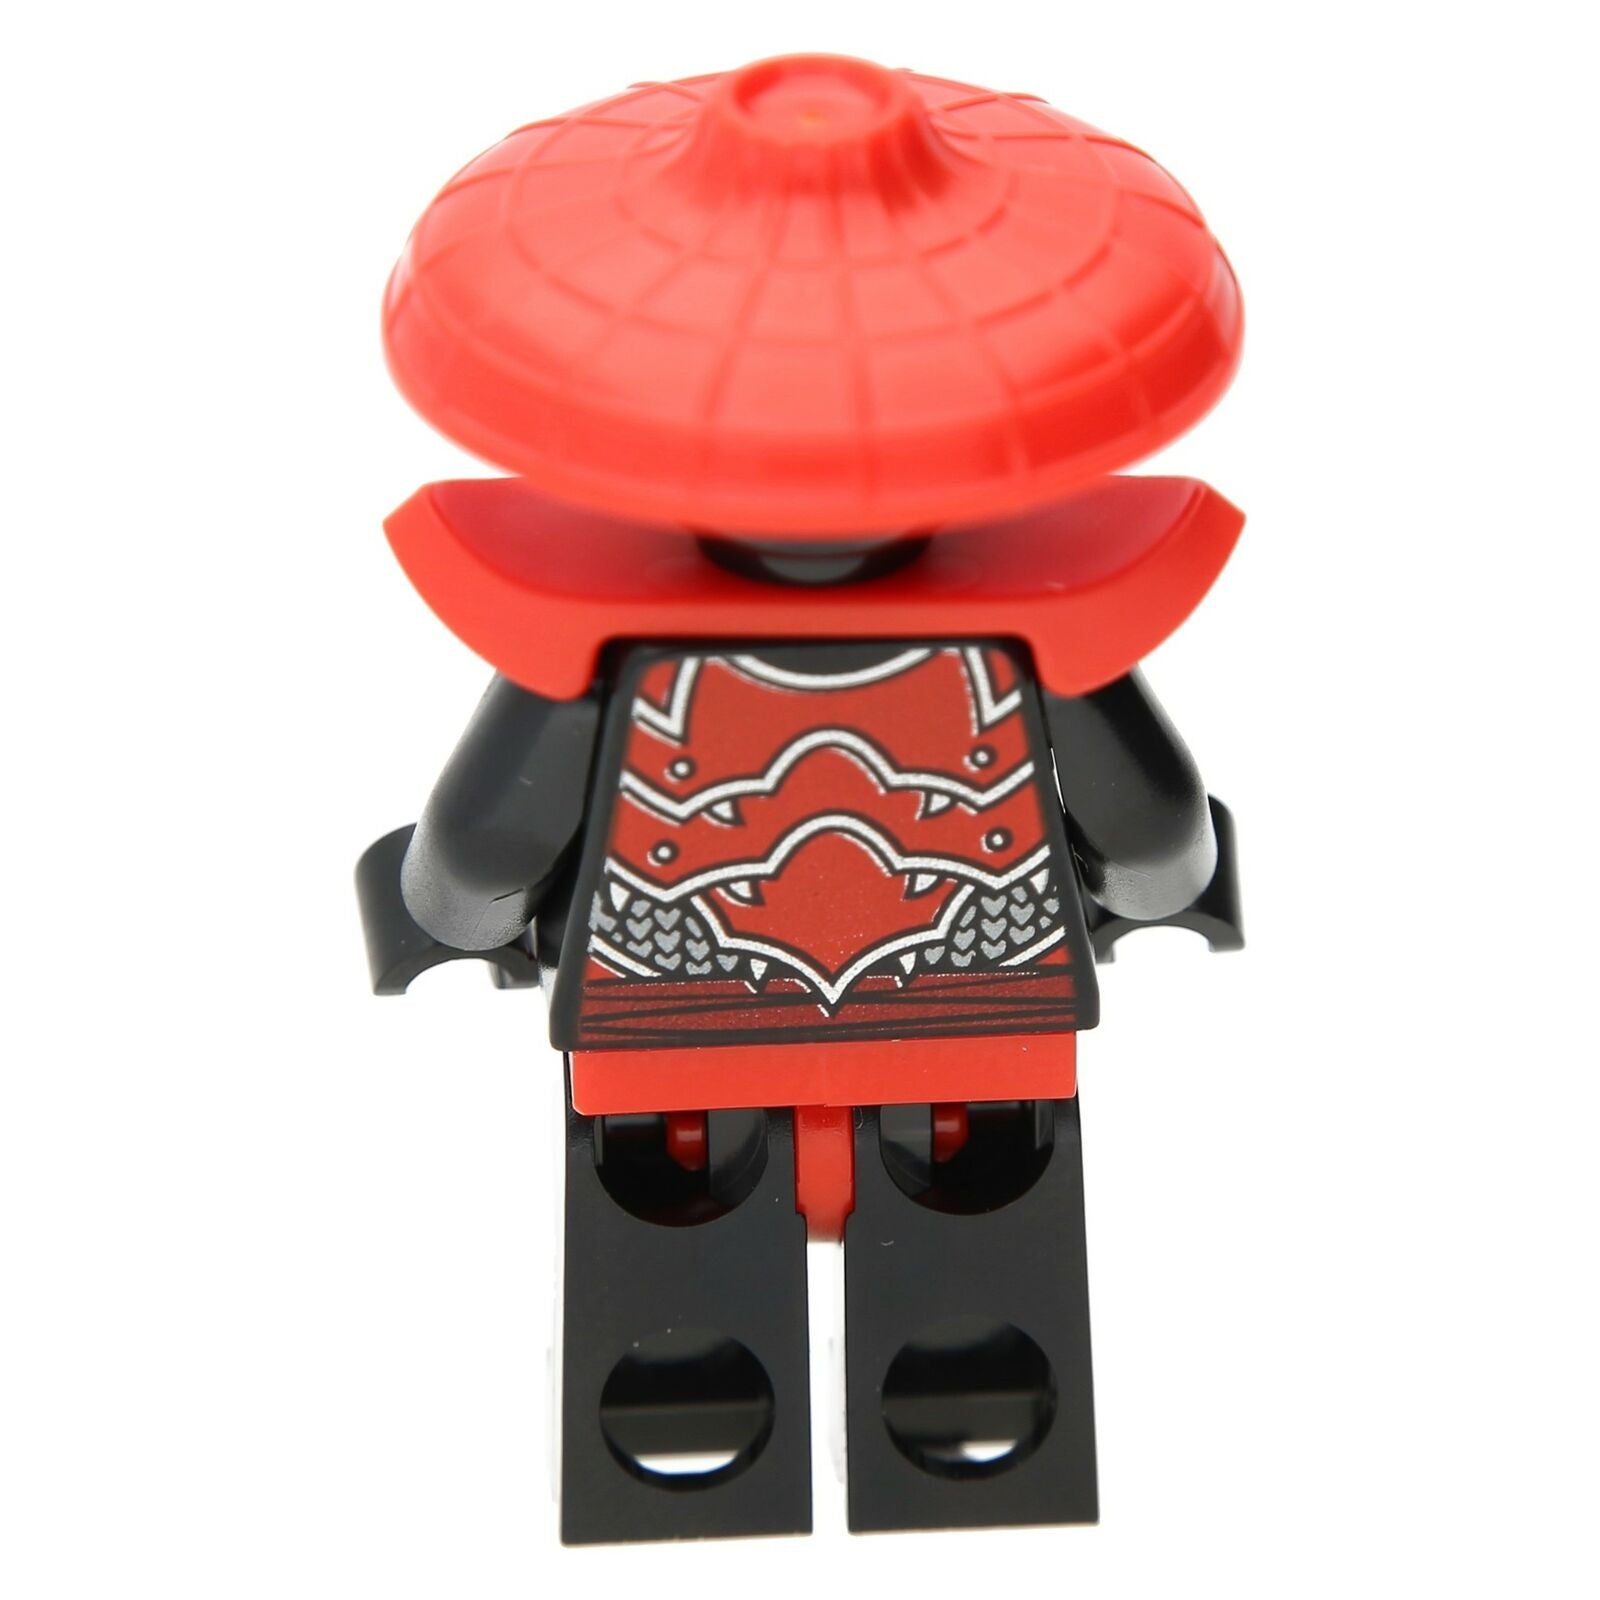 LEGO Ninjago Minifigur - Stone Army scouts with a helmet and shoulder pad